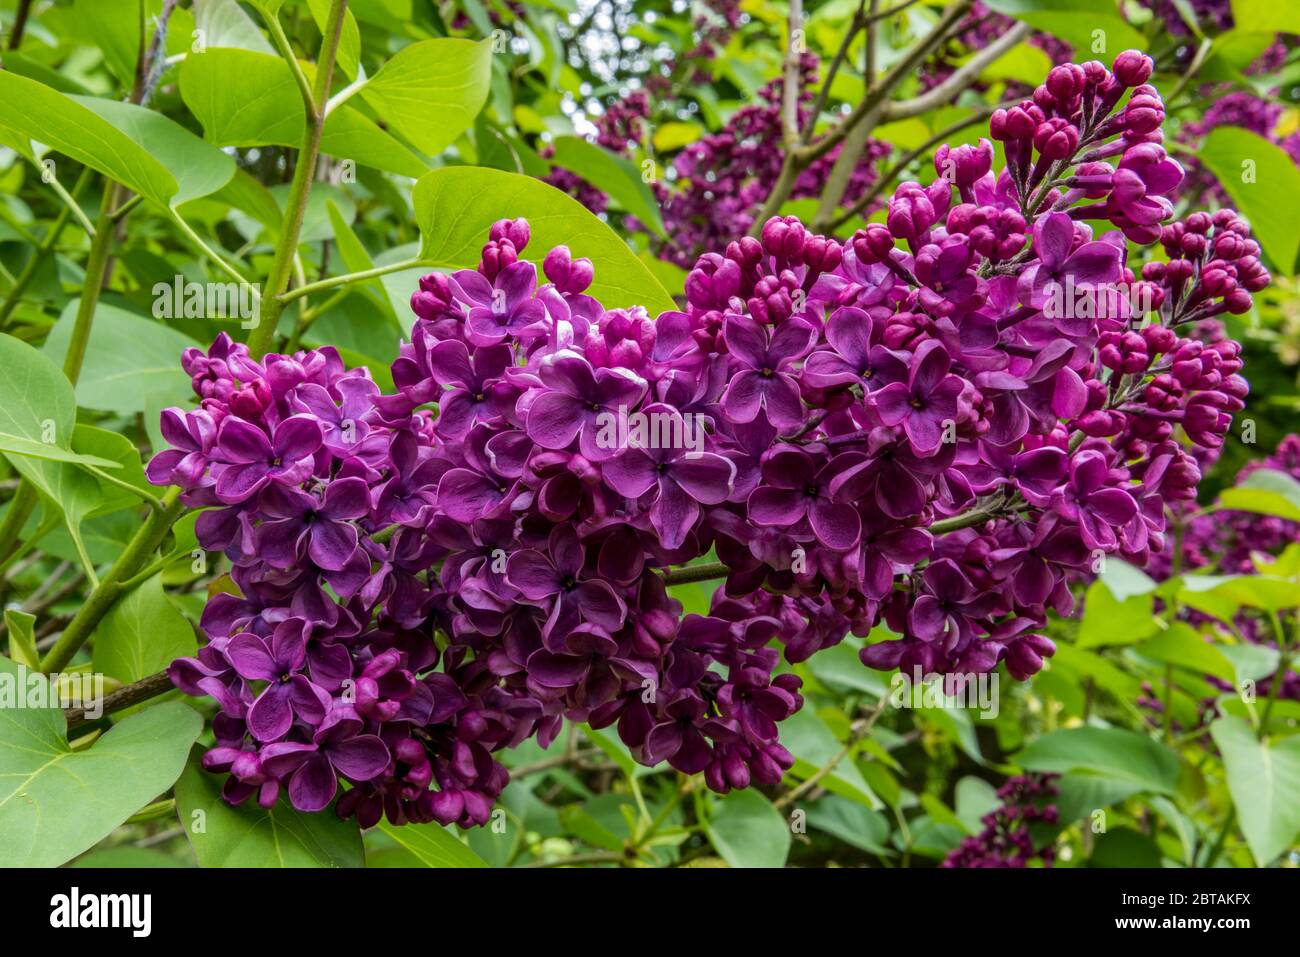 Close up of Lilac SYRINGA vulgaris 'Andenken an Ludwig Spath' ('Souvenir de Louis Spaeth') flowering on large shrub with green leaves in background. Stock Photo